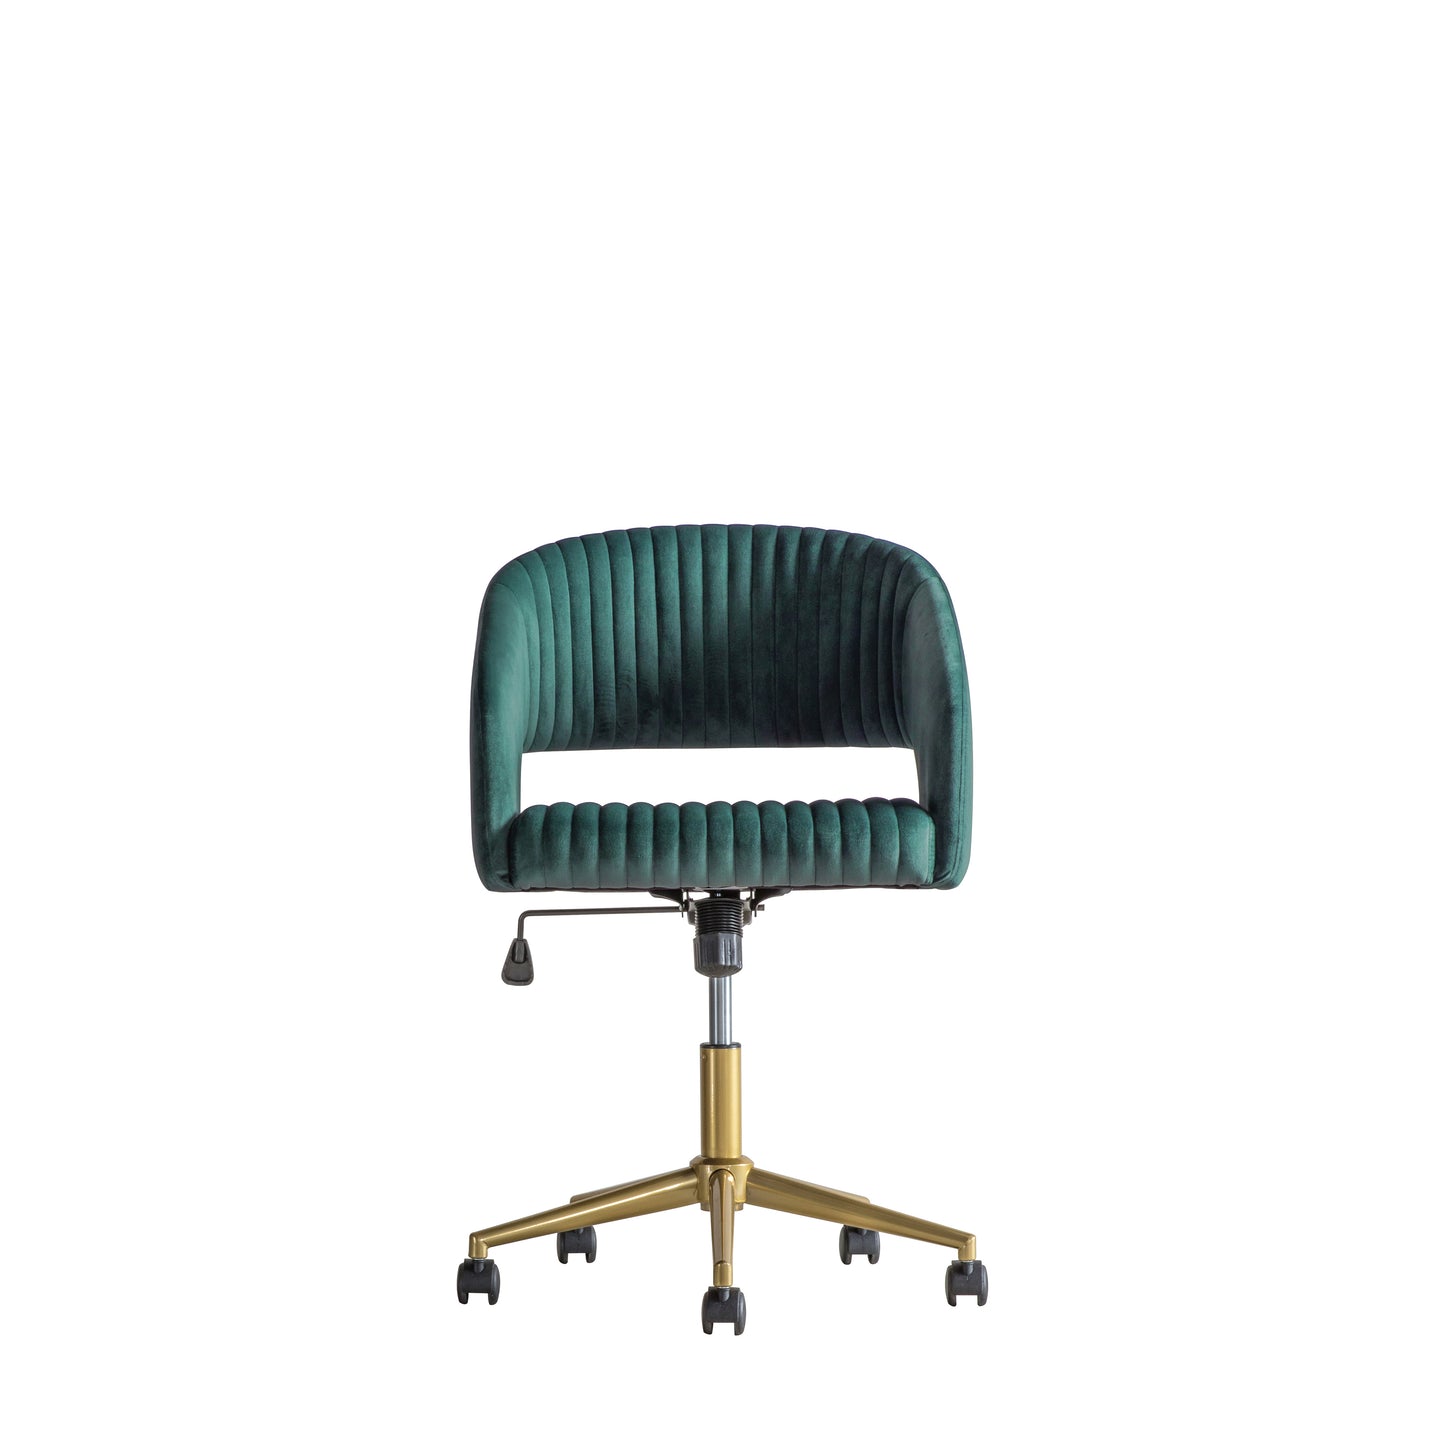 Load image into Gallery viewer, A Murray Swivel Chair Green Velvet with a green velvet upholstered seat for interior decor enthusiasts and home furniture seekers from Kikiathome.co.uk.
